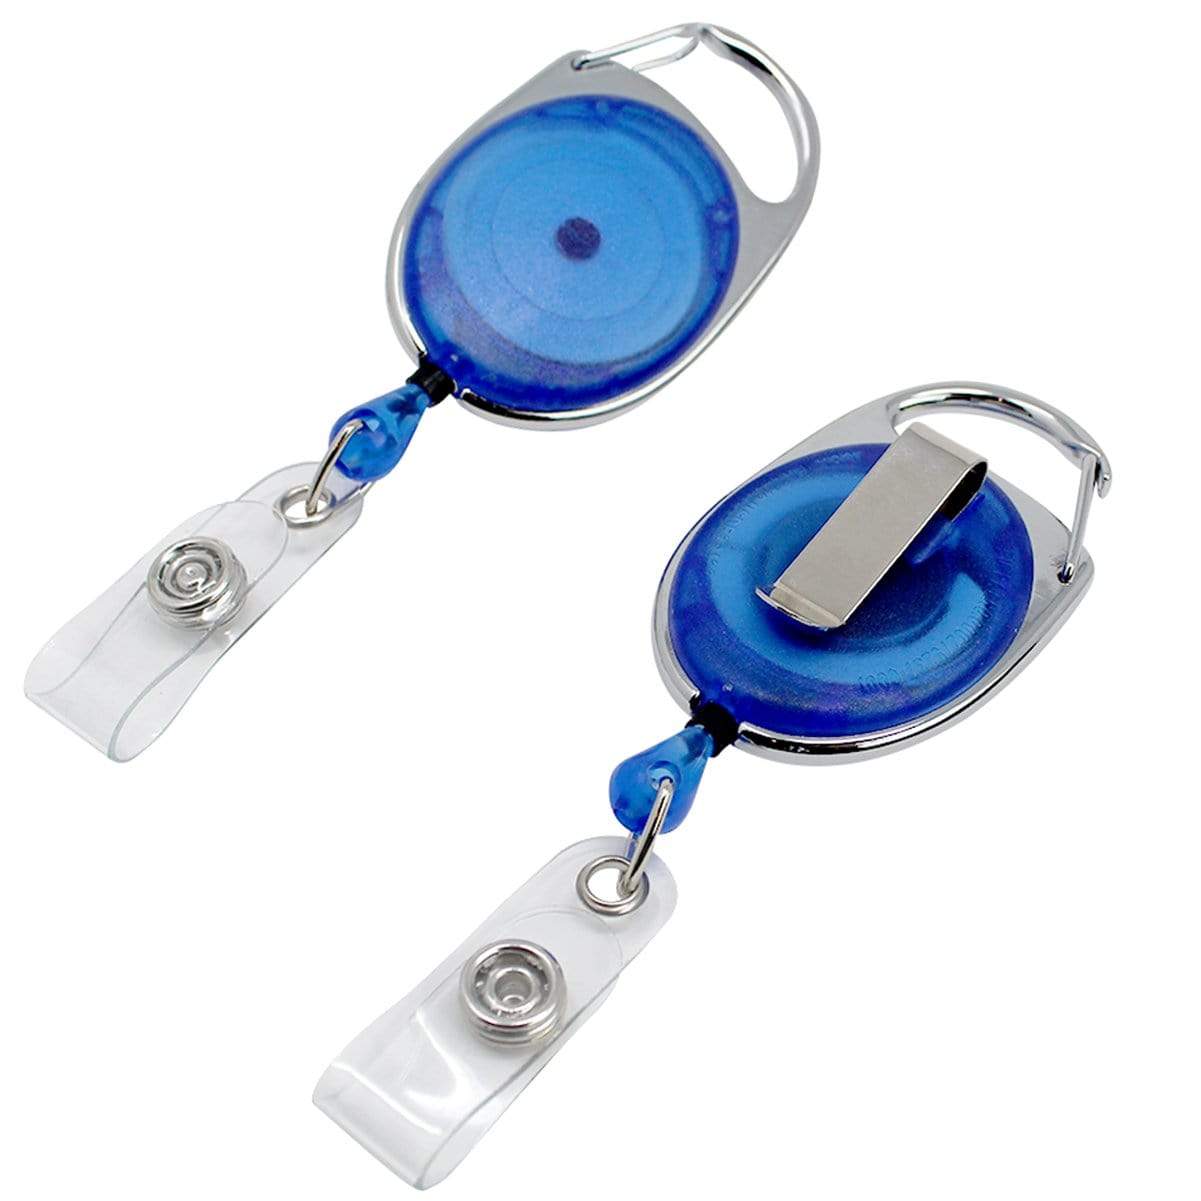 Premium Oval Badge Reel with Carabiner and Belt Clip (P/N 2120